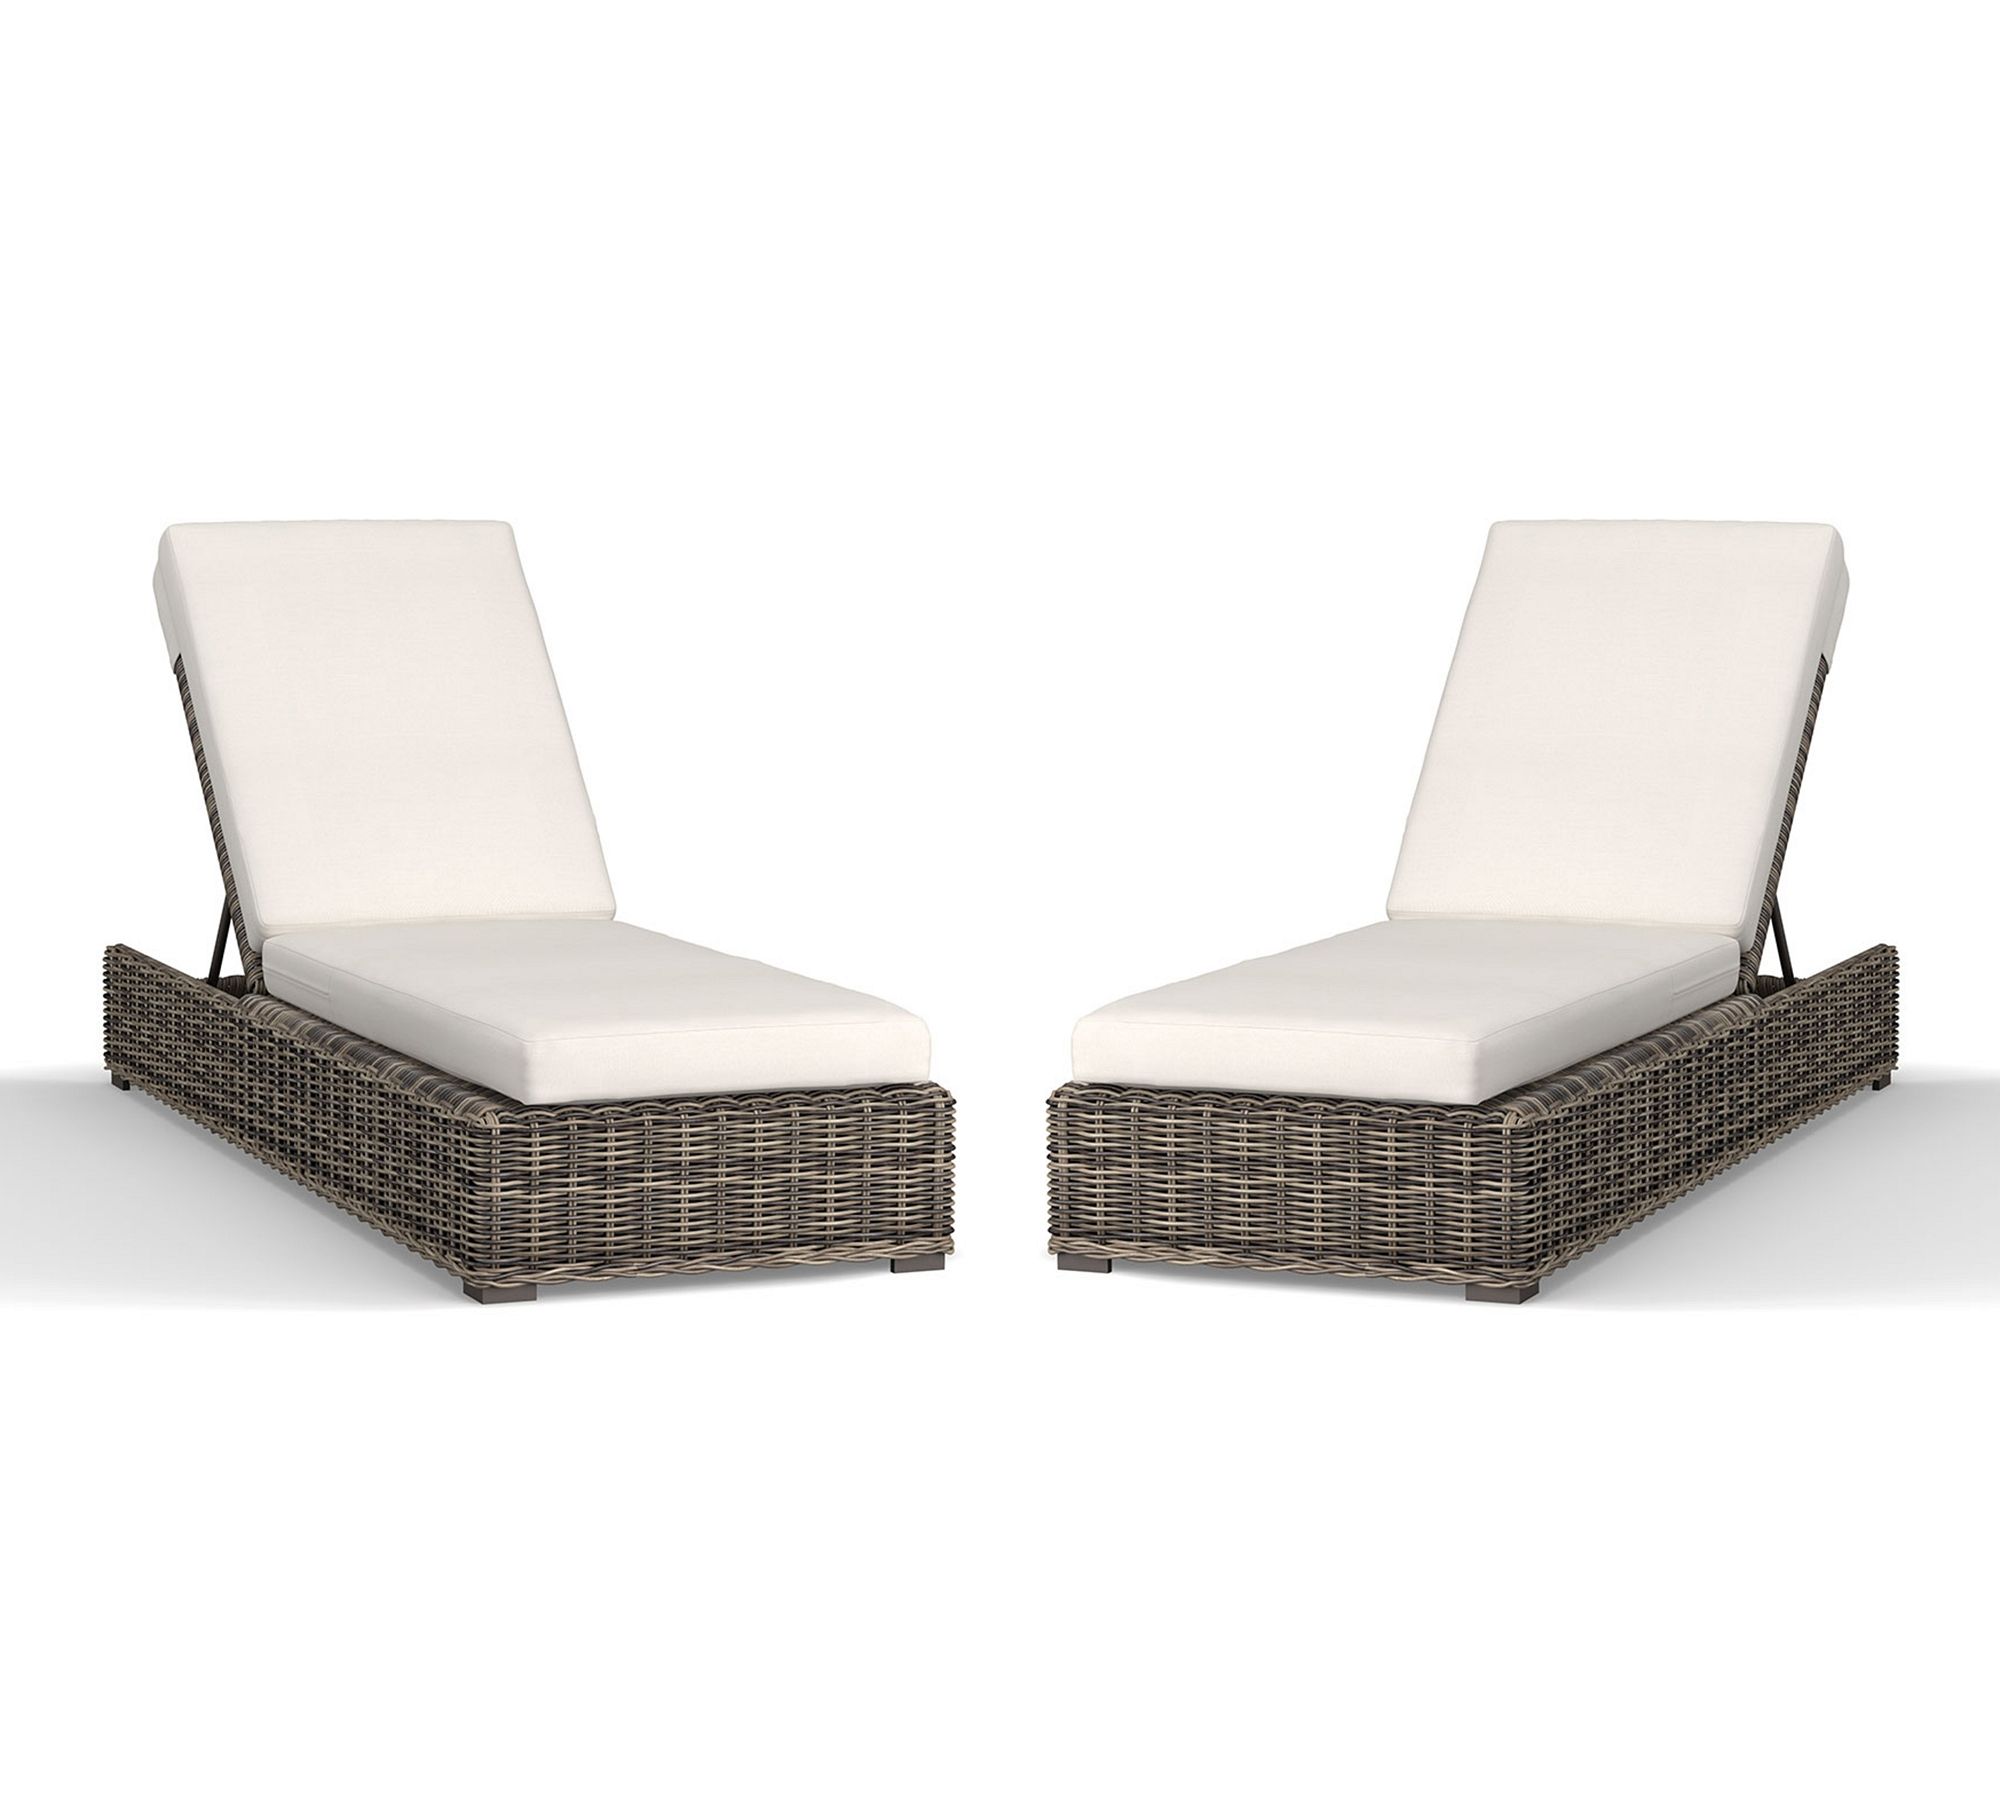 Huntington Wicker Outdoor Chaise Lounge